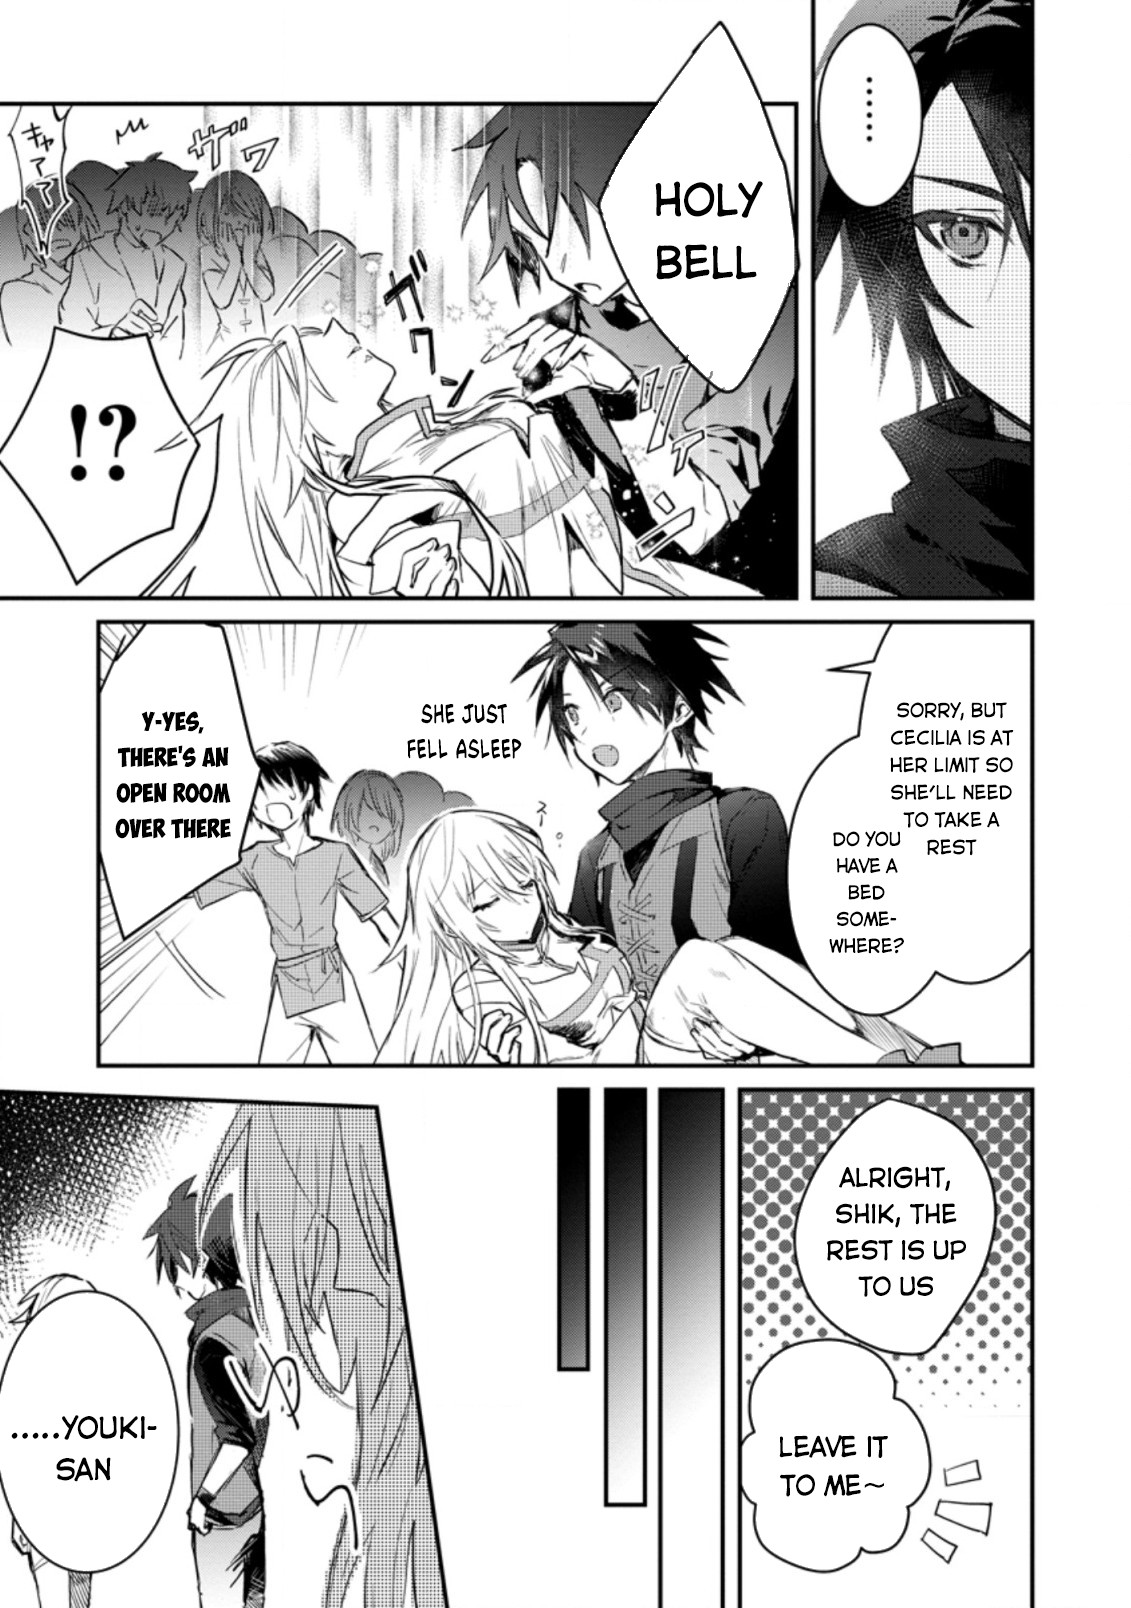 There Was a Cute Girl in the Hero's Party, so I Tried Confessing to Her  Manga Reading Free Online